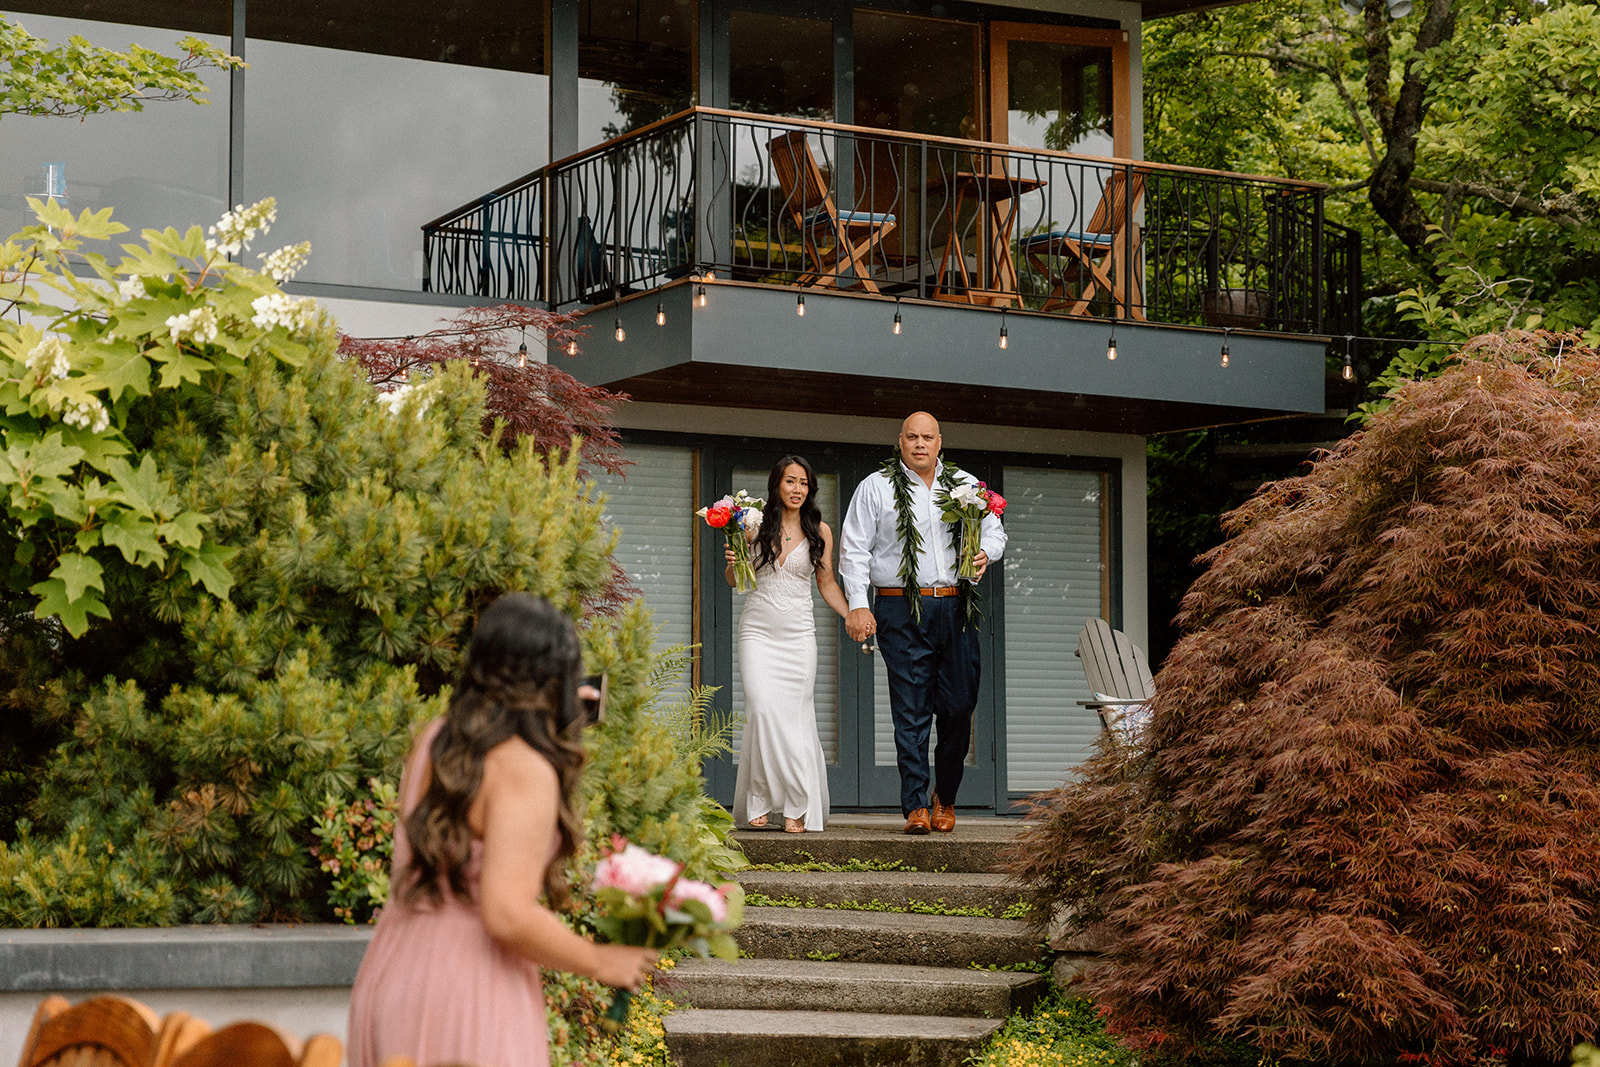 Beautiful bride and groom during their Airbnb elopement experience with outdoor wedding decor and unique wedding reception location